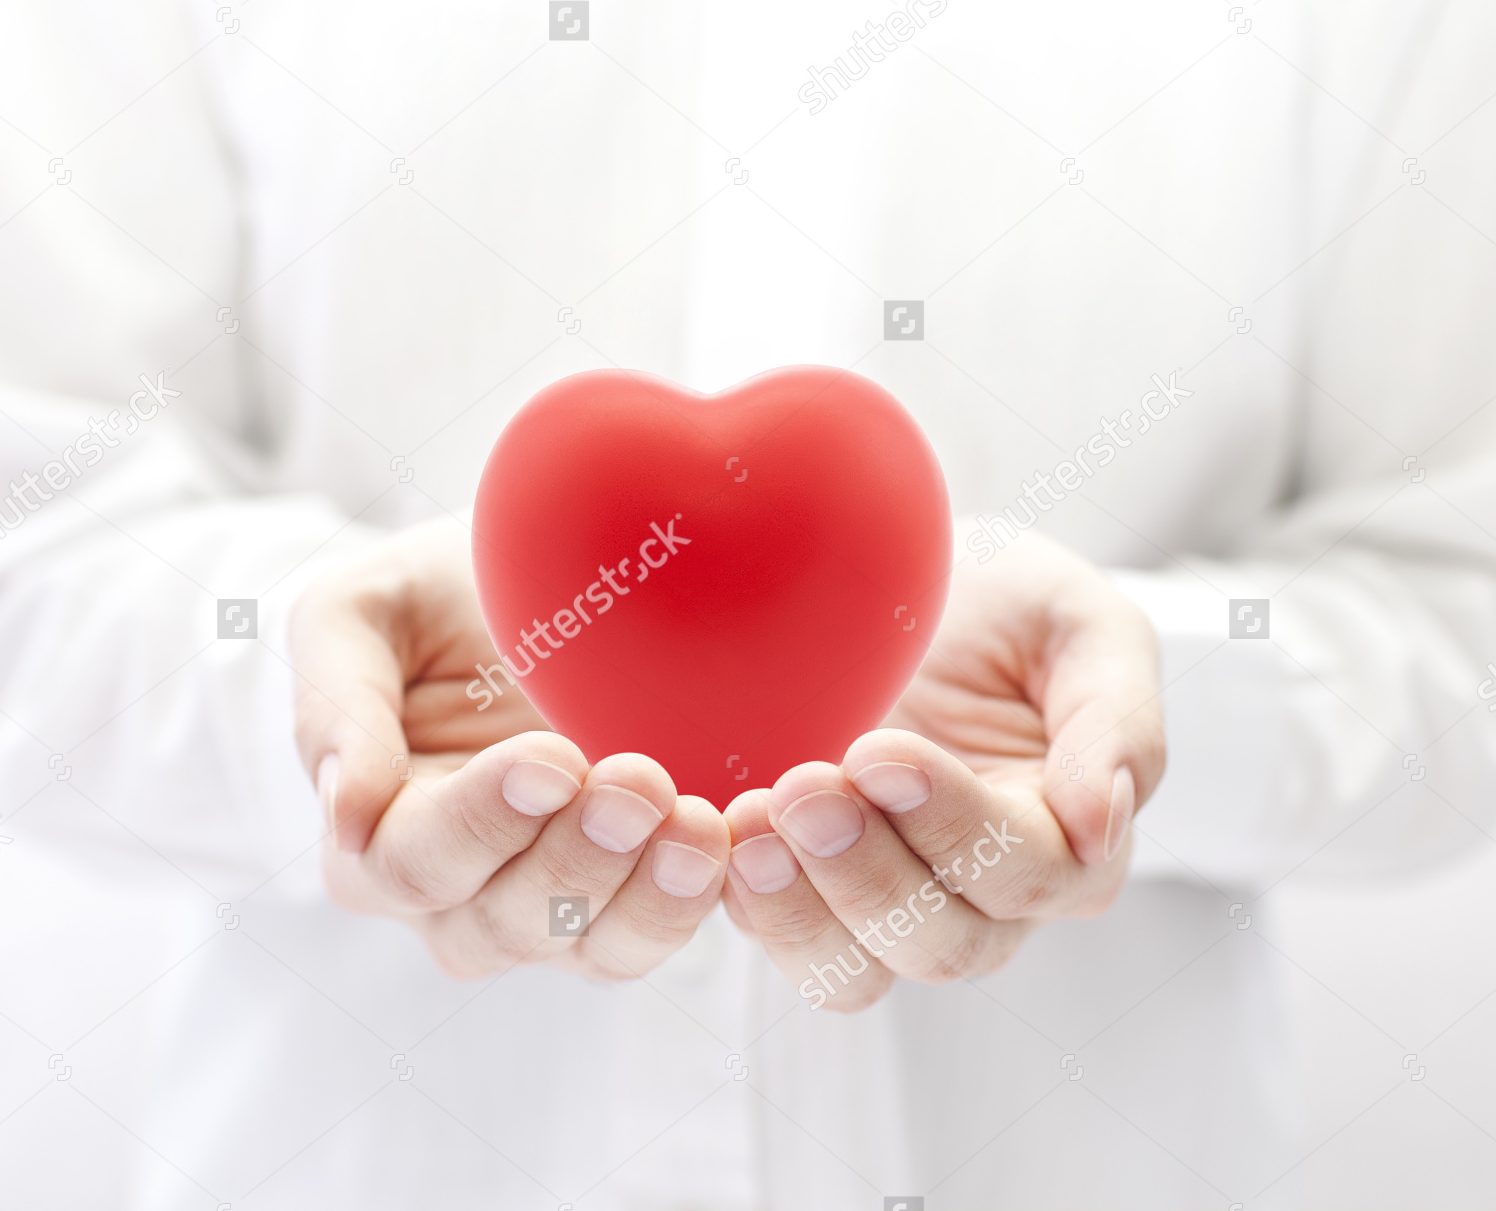 stock-photo-health-insurance-or-love-concept-87124858